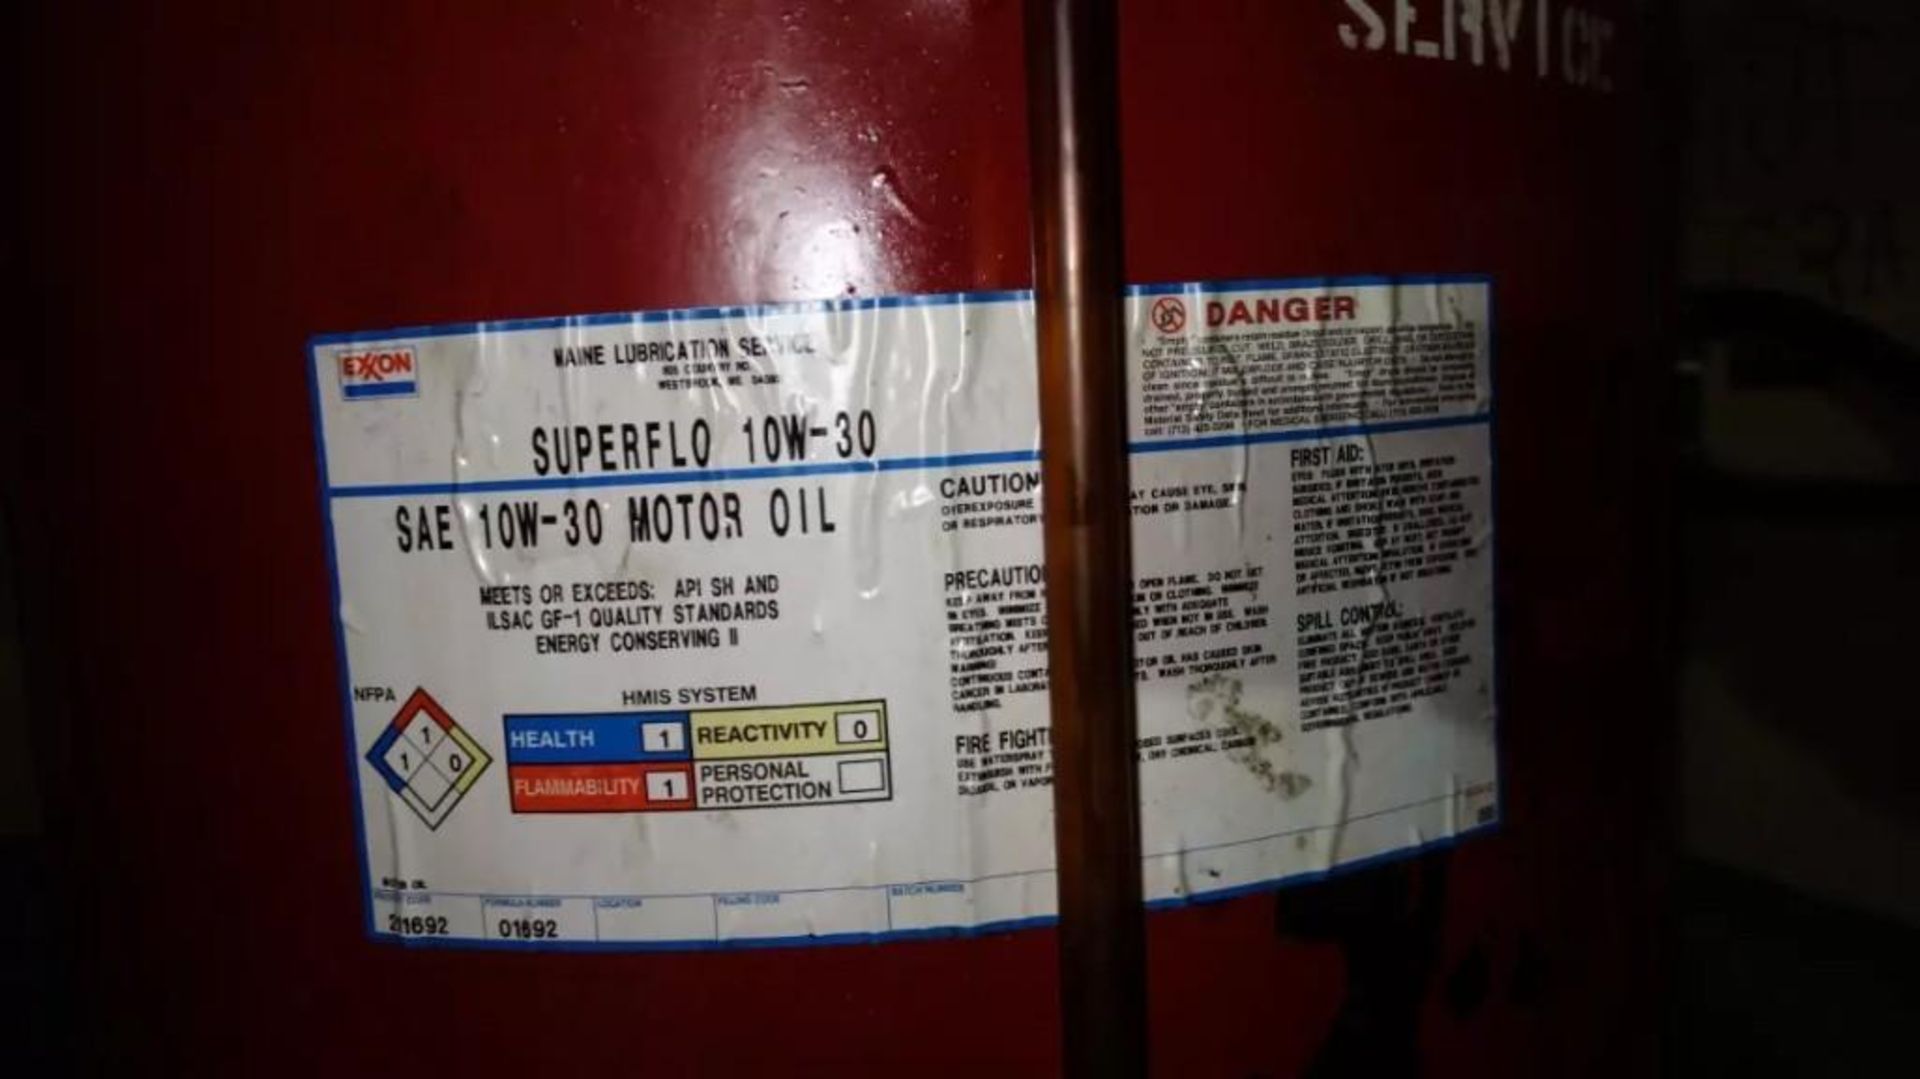 LOT OF 2 LUBRICATION OIL DRUMS WERE USED WITH EXXON 10W-30 OIL - Bild 5 aus 6